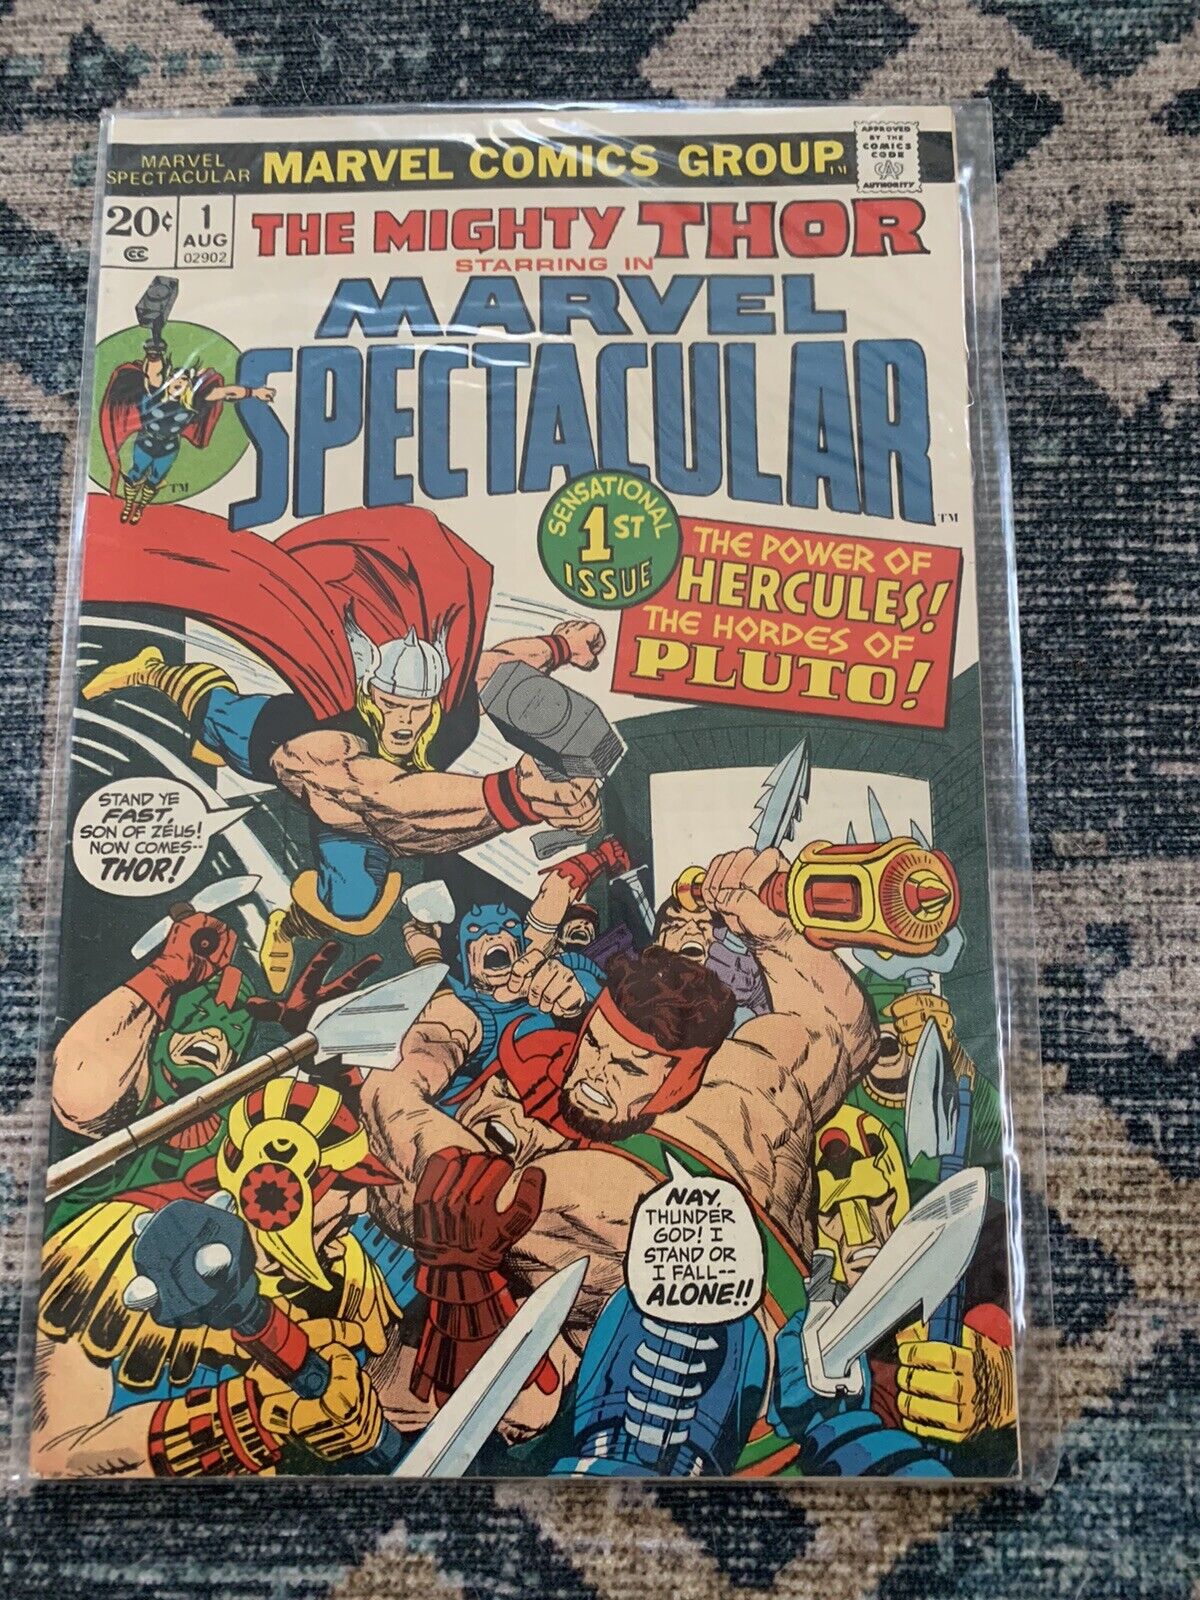 The Mighty THOR Starring In MARVEL SPECTACULAR #1 1973 Marvel Comics (1st Issue)